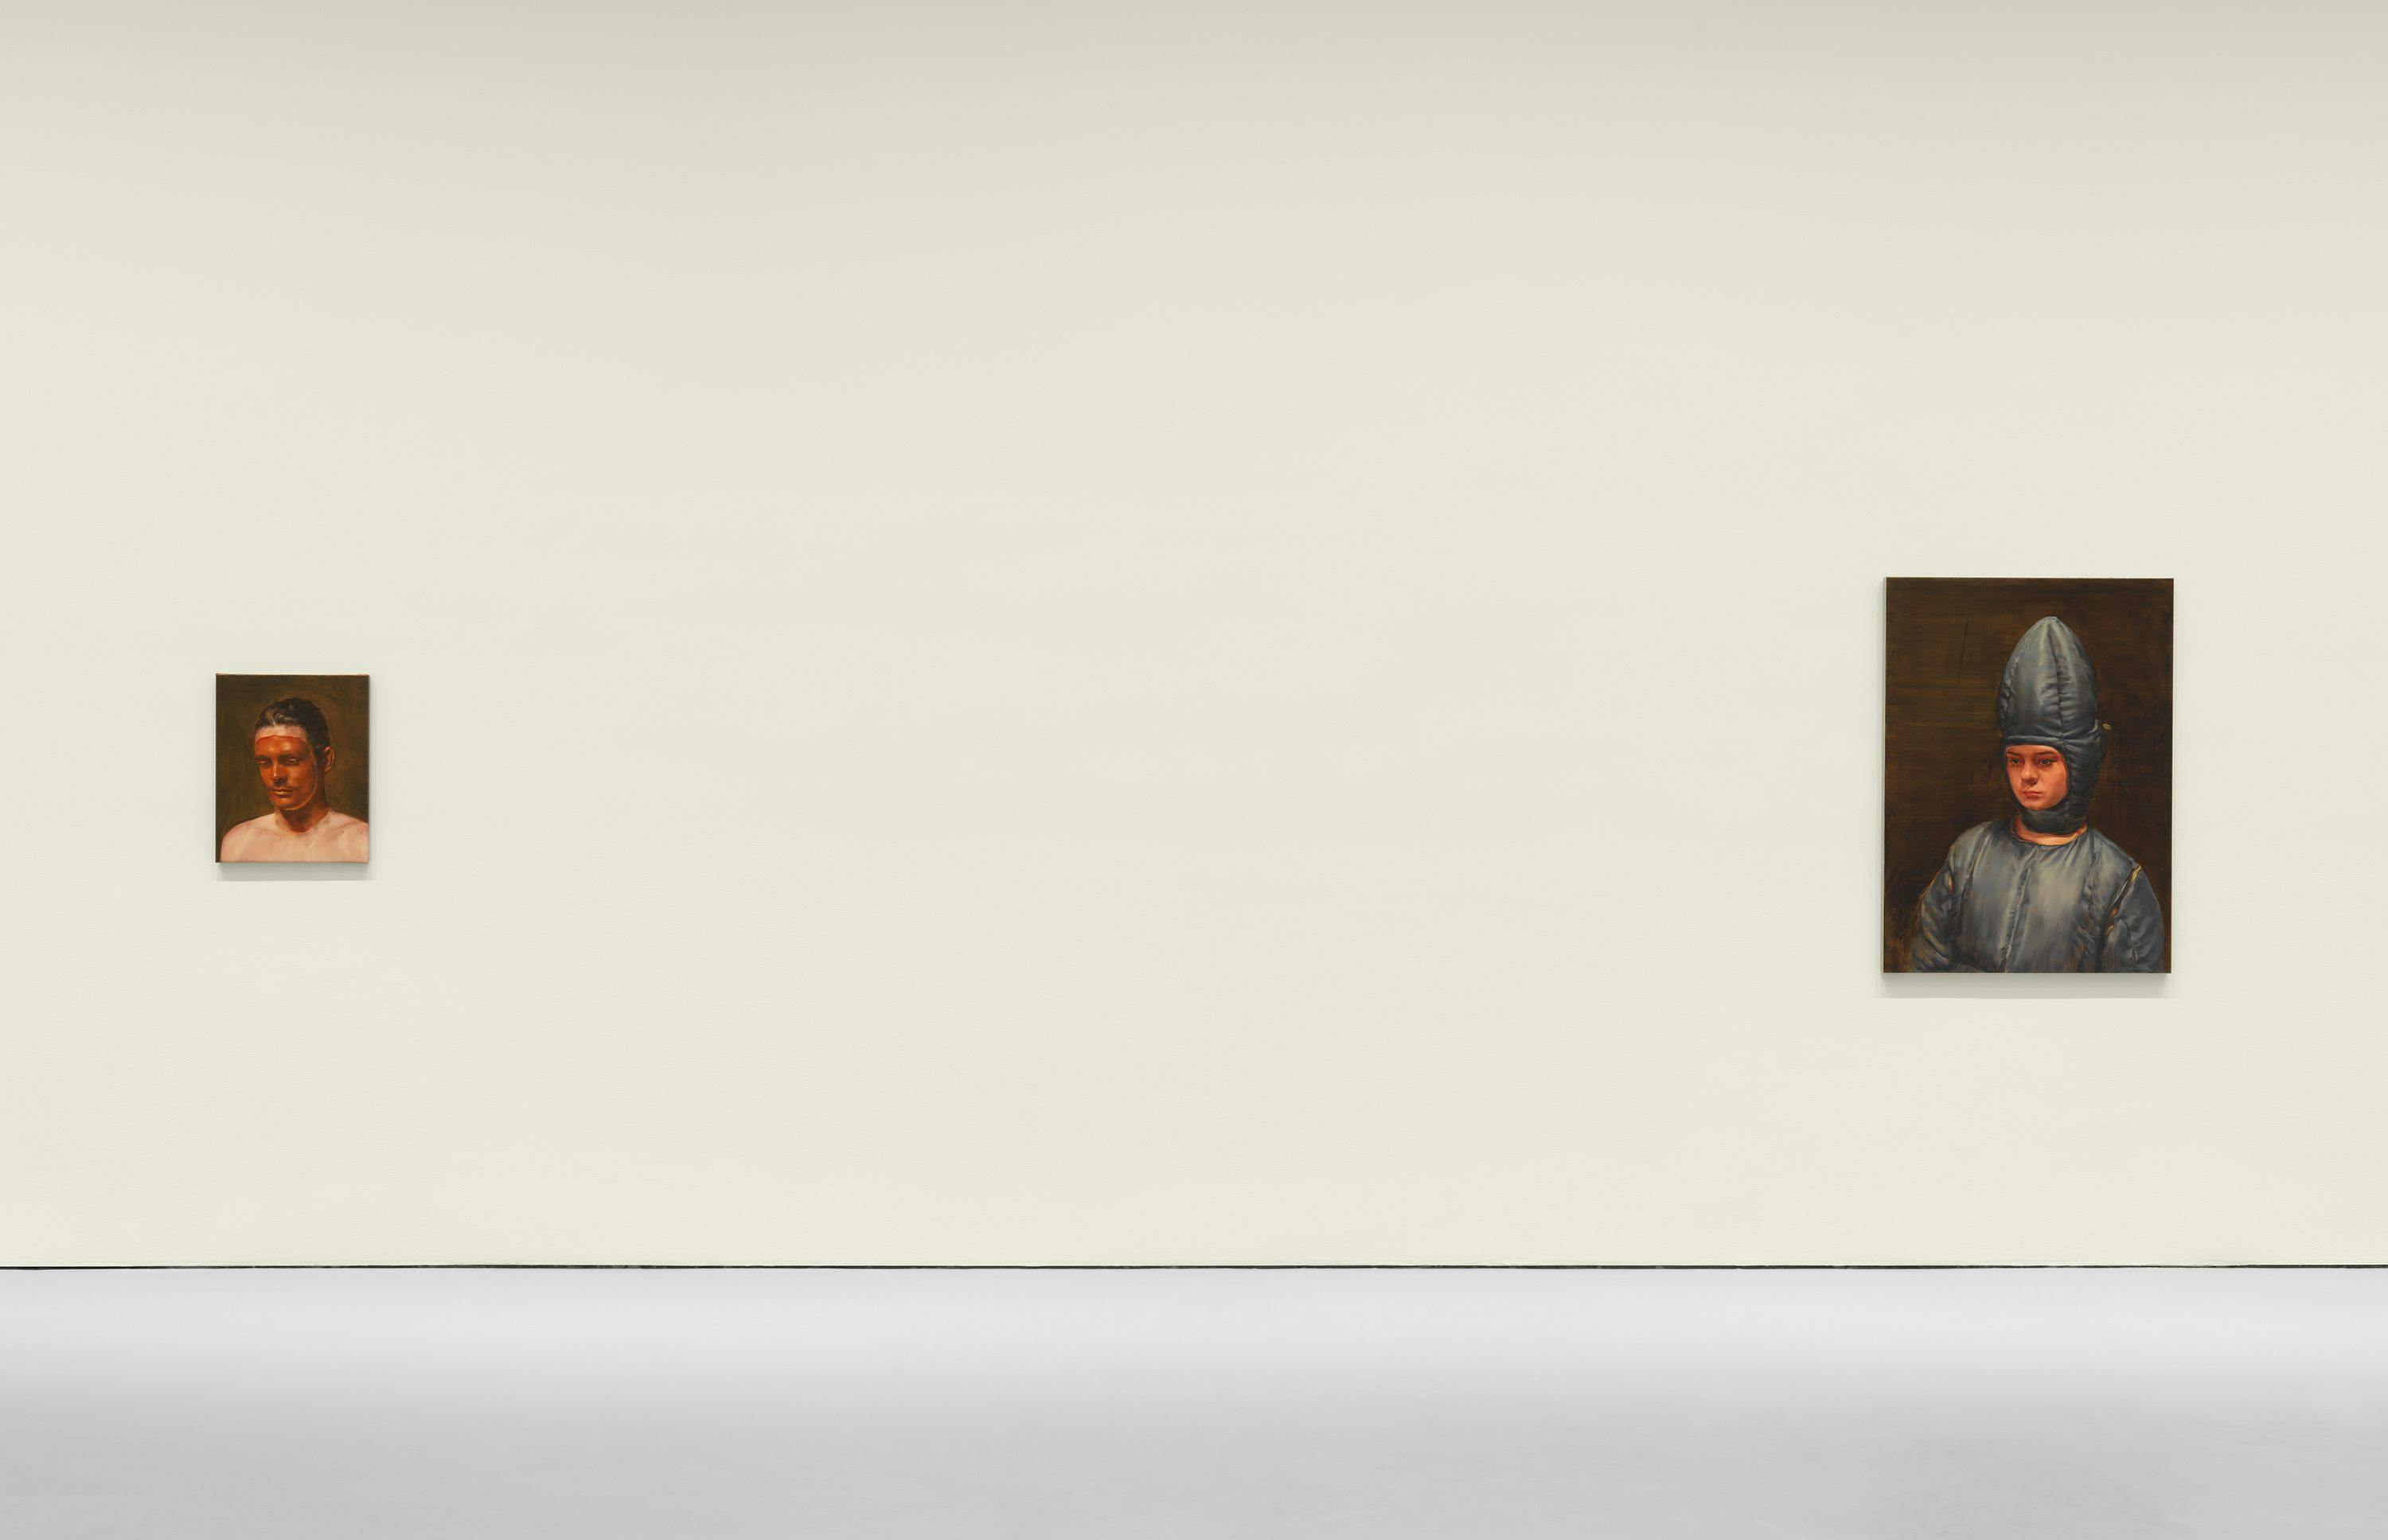 An installation view of the exhibition, Michaël Borremans: The Acrobat, at David Zwirner in New York, dated 2022.